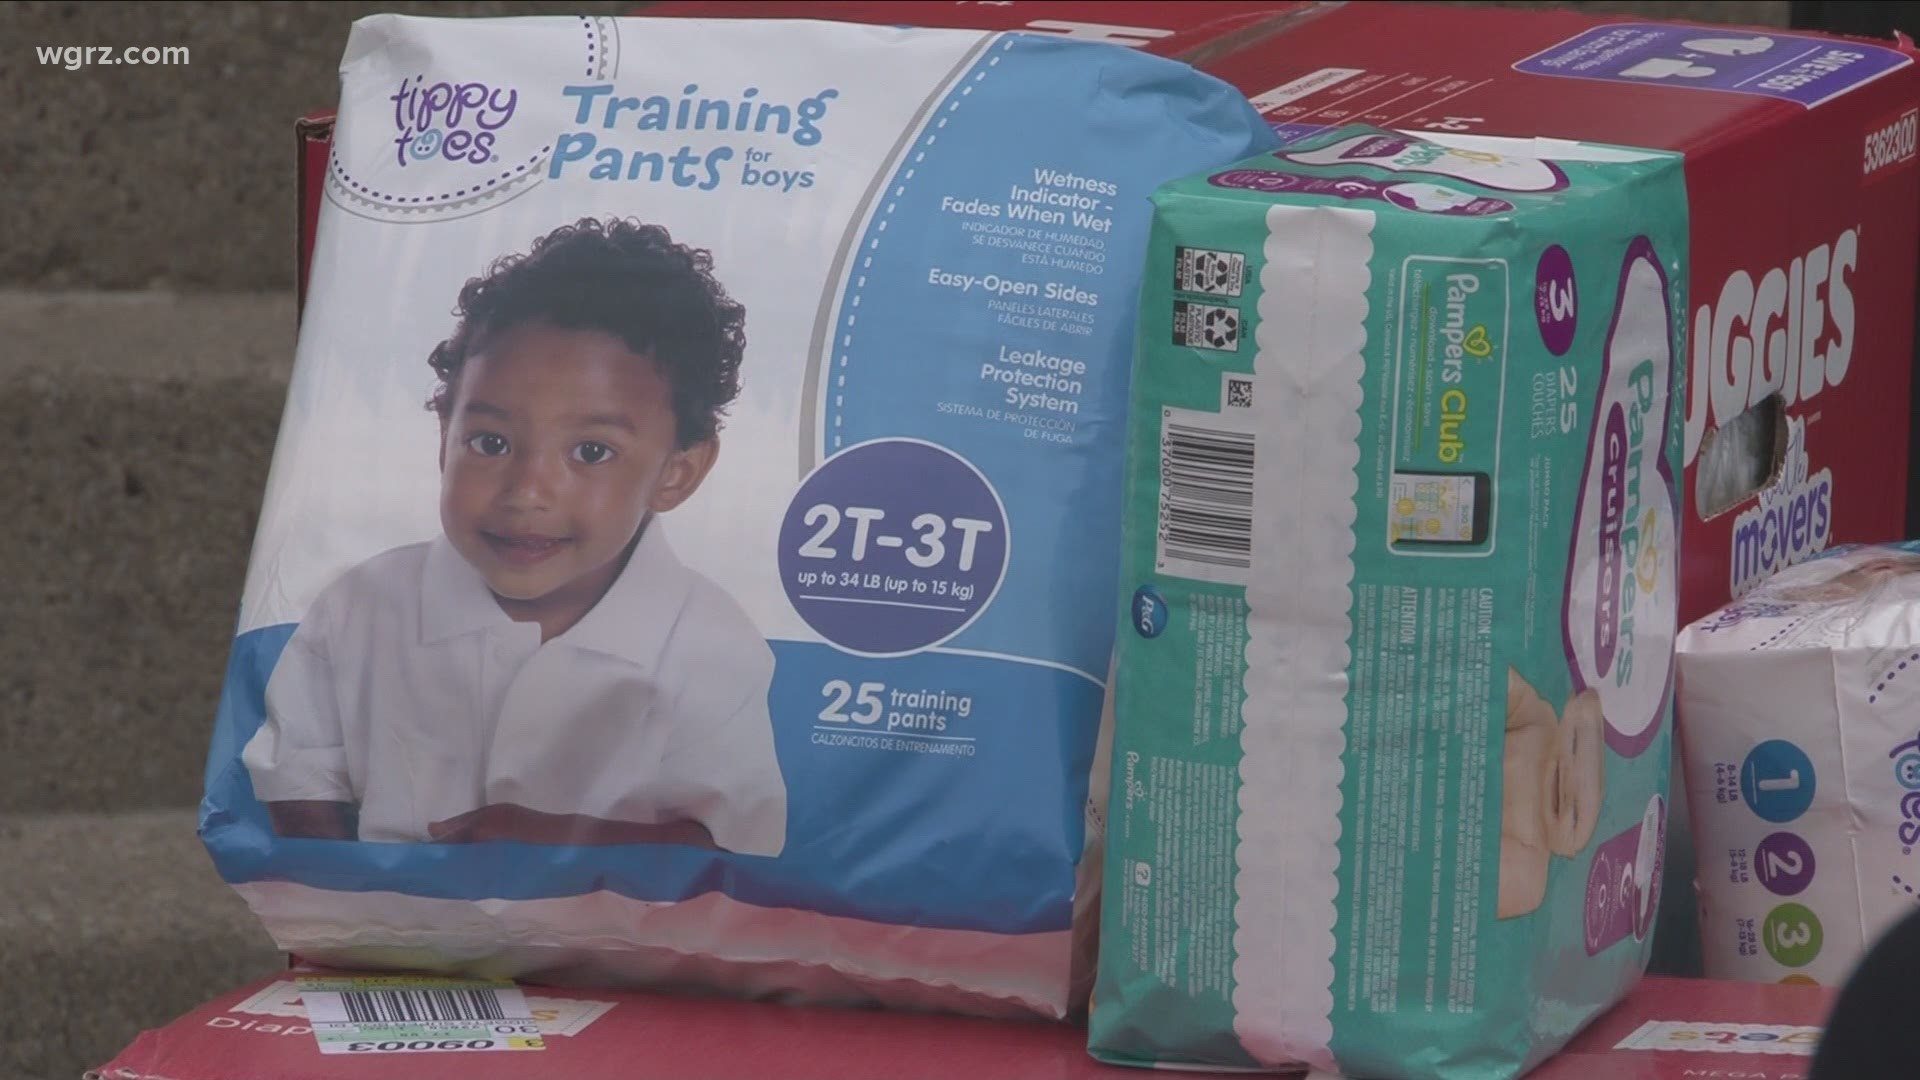 Catholic Charities is teaming up with BlueCross BlueShield of Western New York to offer Diaper Days events in Erie County.